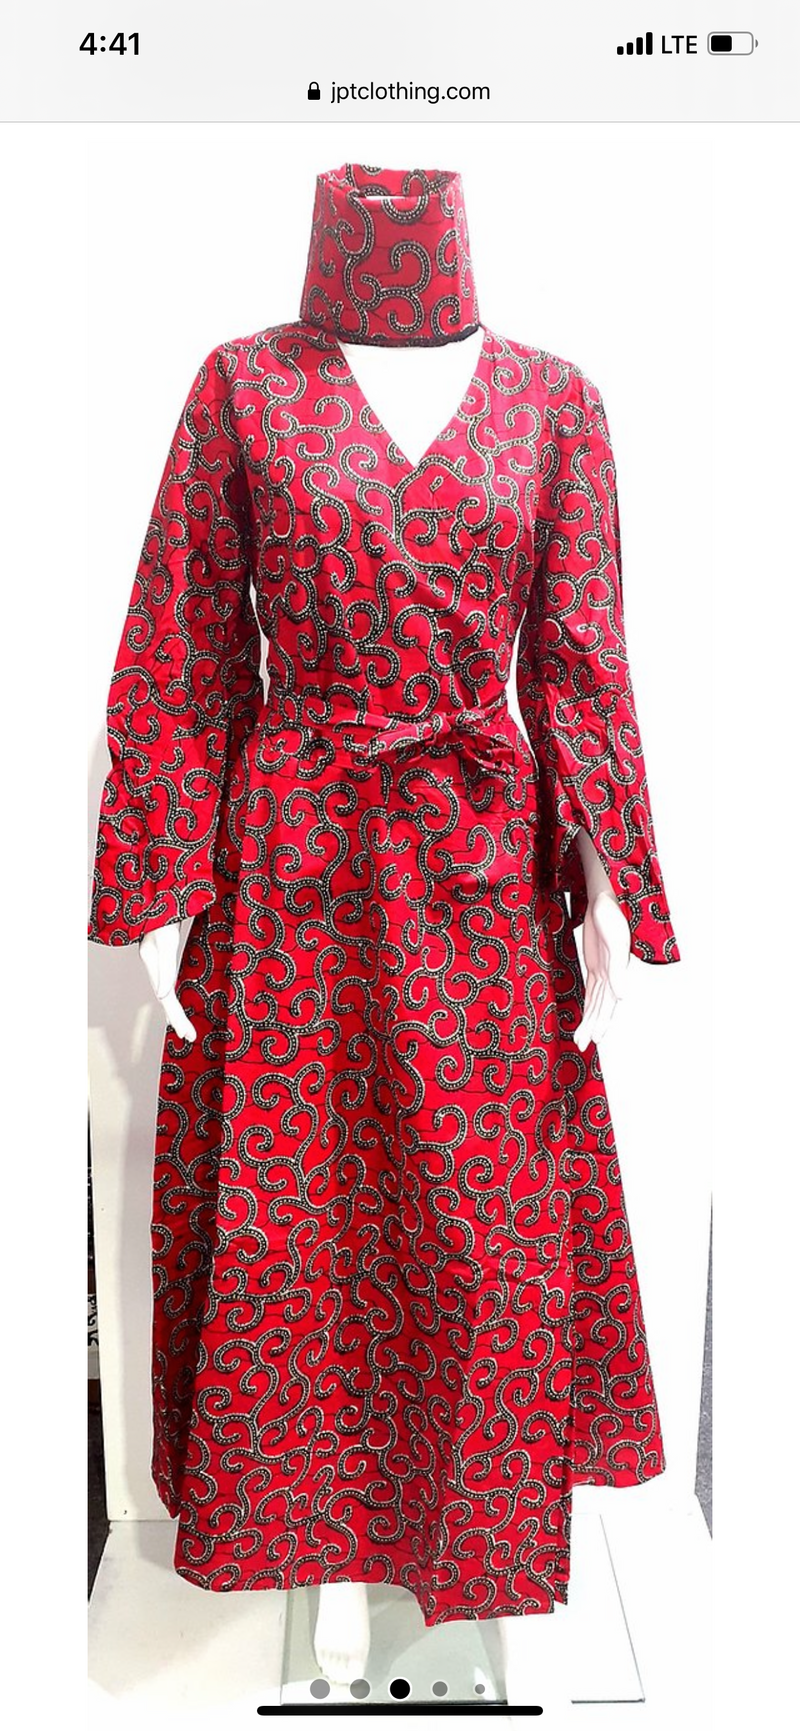 Dress Wrap - African print Wrap dress With long belle sleeves and matching head wraps - Afrocentric Boutique